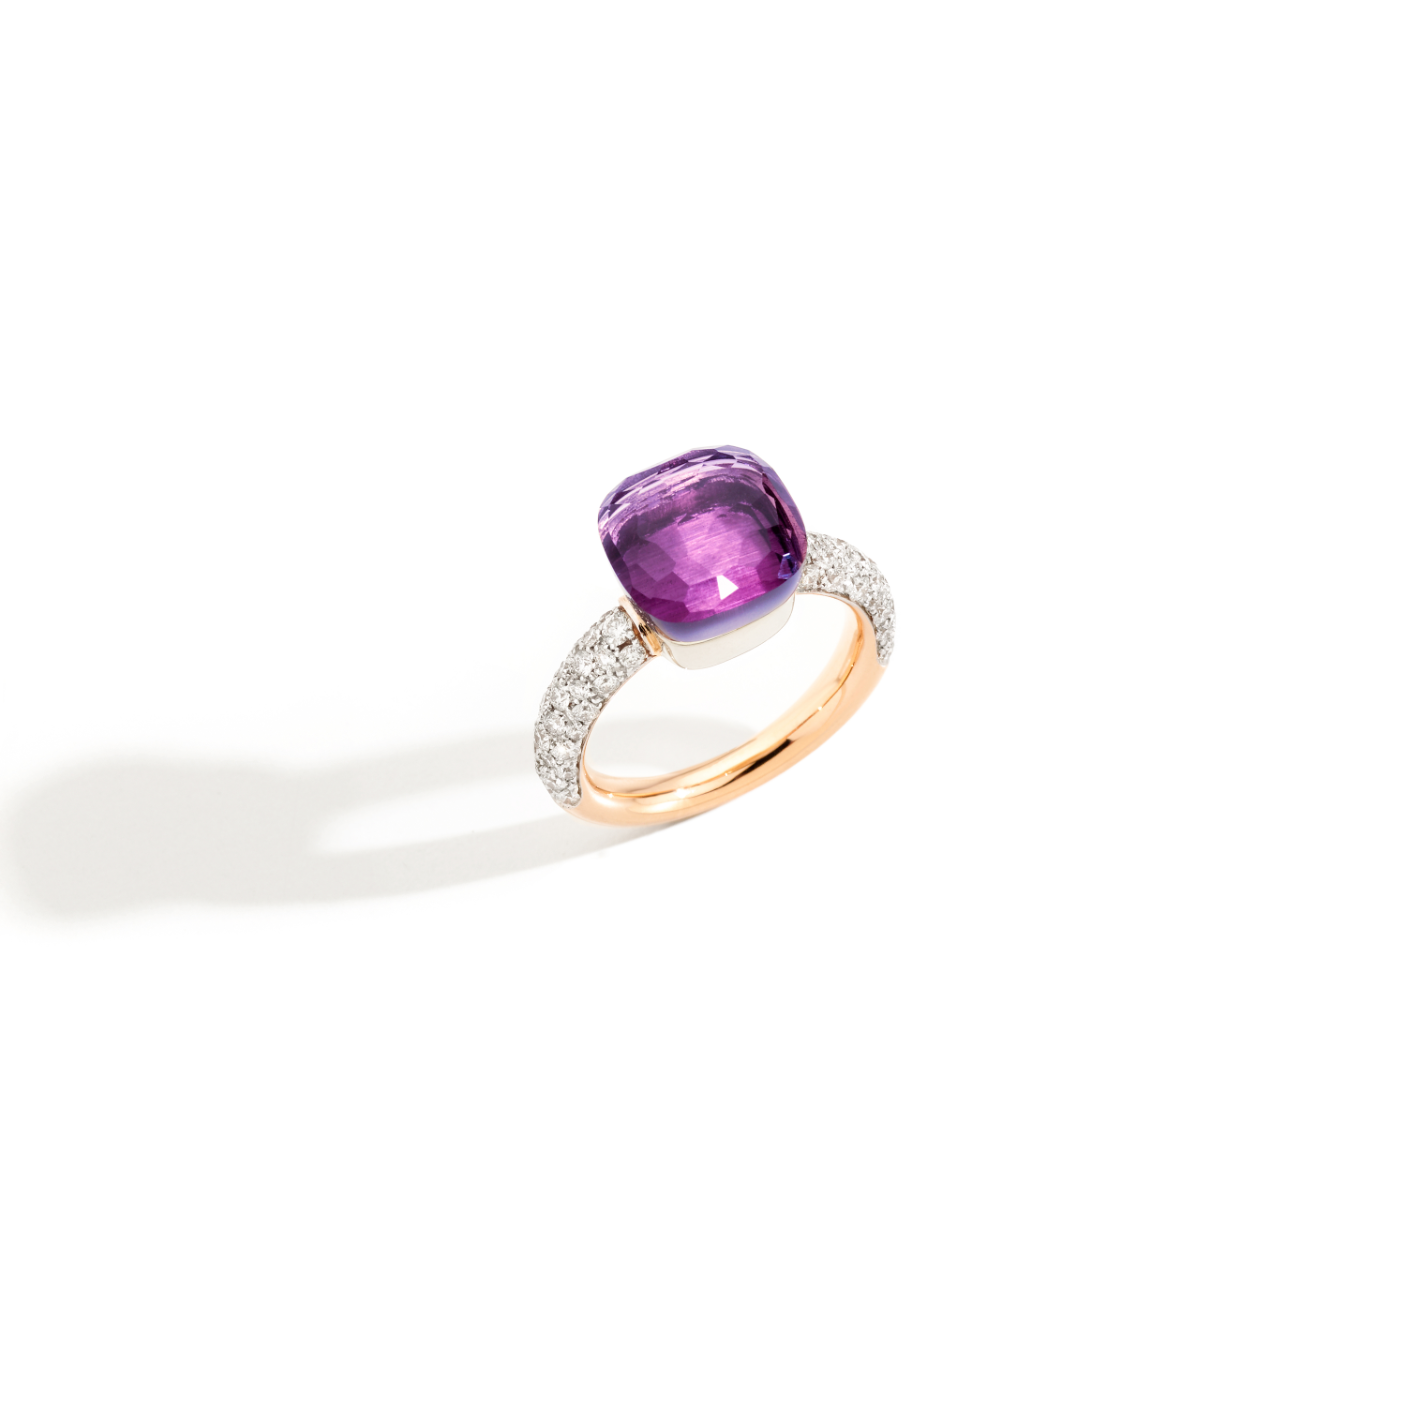 PAC0040_O6WHR_DB0OI_010_Pomellato_ring-nudo-classic-rose-gold-18kt-white-gold-18kt-amethyst-diamond.png